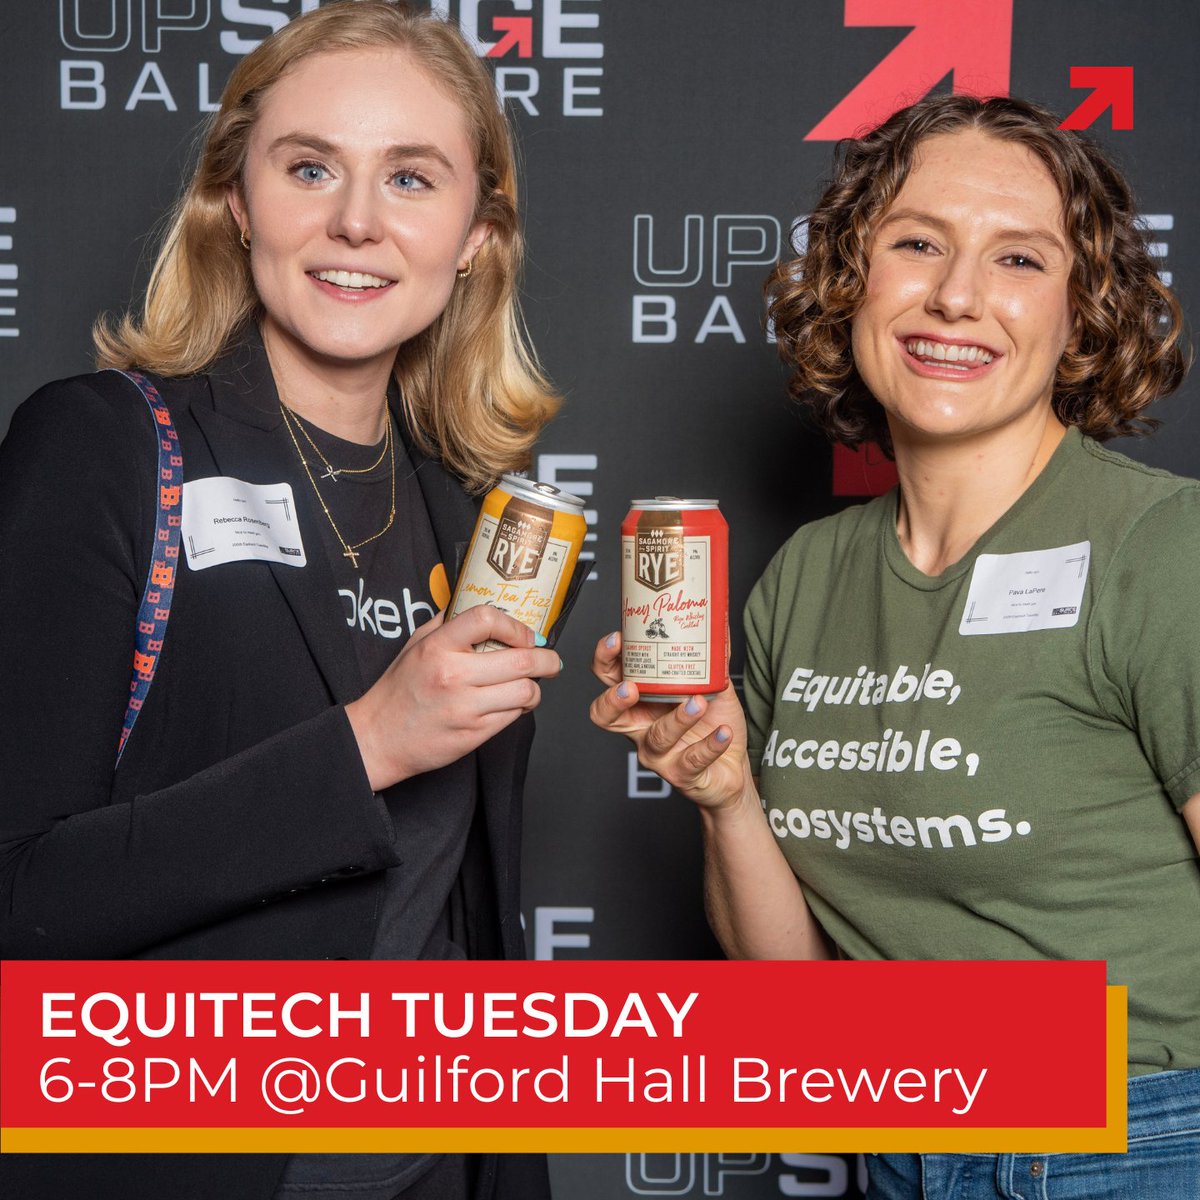 🌟 Discover the intersection of Baltimore's tech community at Equitech Tuesday! 🌇

Let's foster a sense of community, forge new partnerships, and create lasting impact. See you at Equitech Tuesday! 🙌 

#EquitechTuesday #BaltimoreCommunity #InclusiveInnovation #ThisIsEquitech